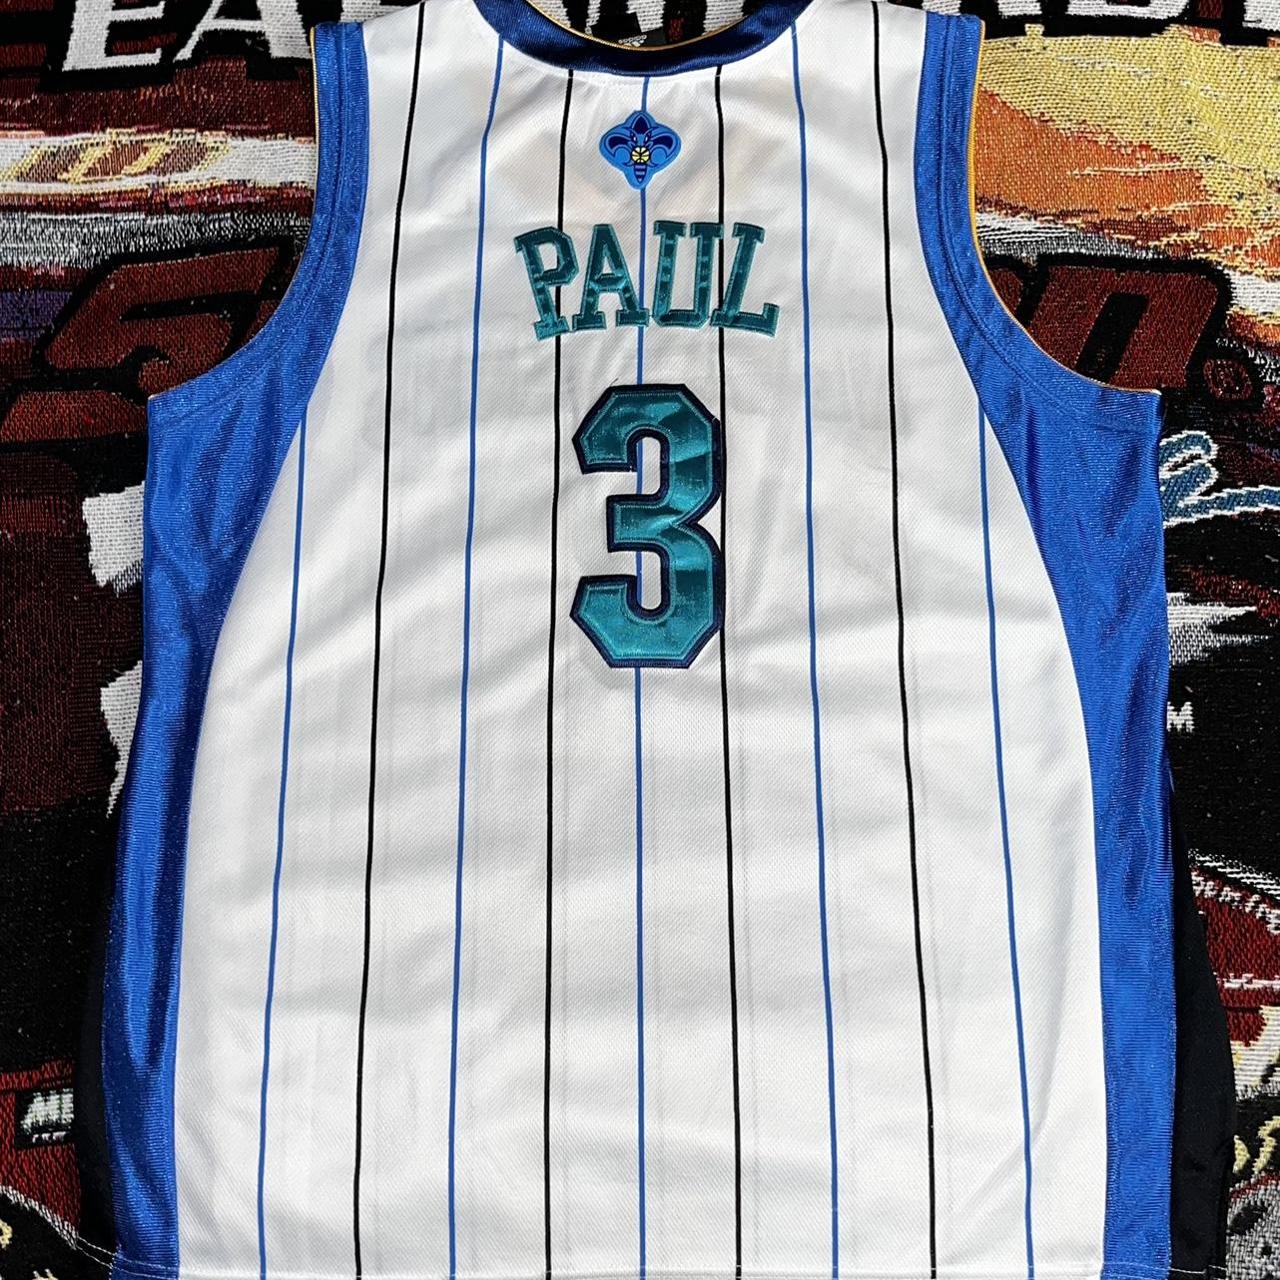 Adidas Chris Paul #3 New Orleans Jersey Size Small - Depop